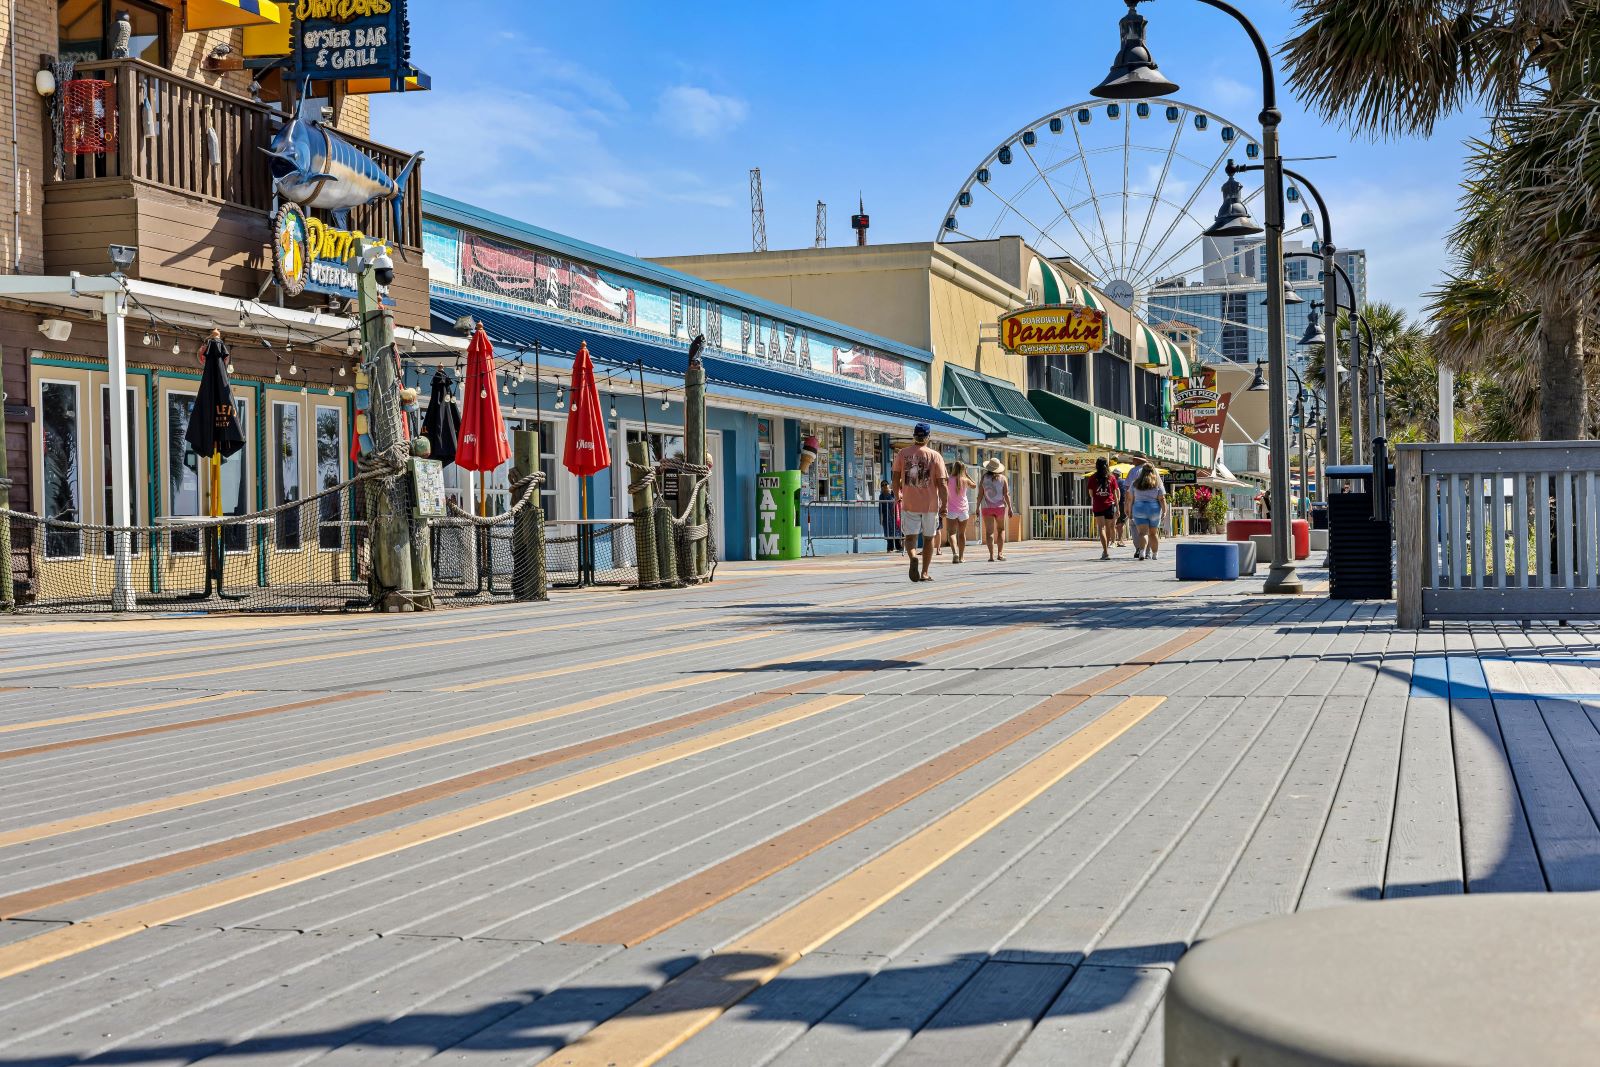 Image Credit: Pexel / Curtis Adams <p>Enjoy the beach and boardwalk attractions without spending a fortune. A daily budget of $50 will cover food, lodging, and activities.</p>